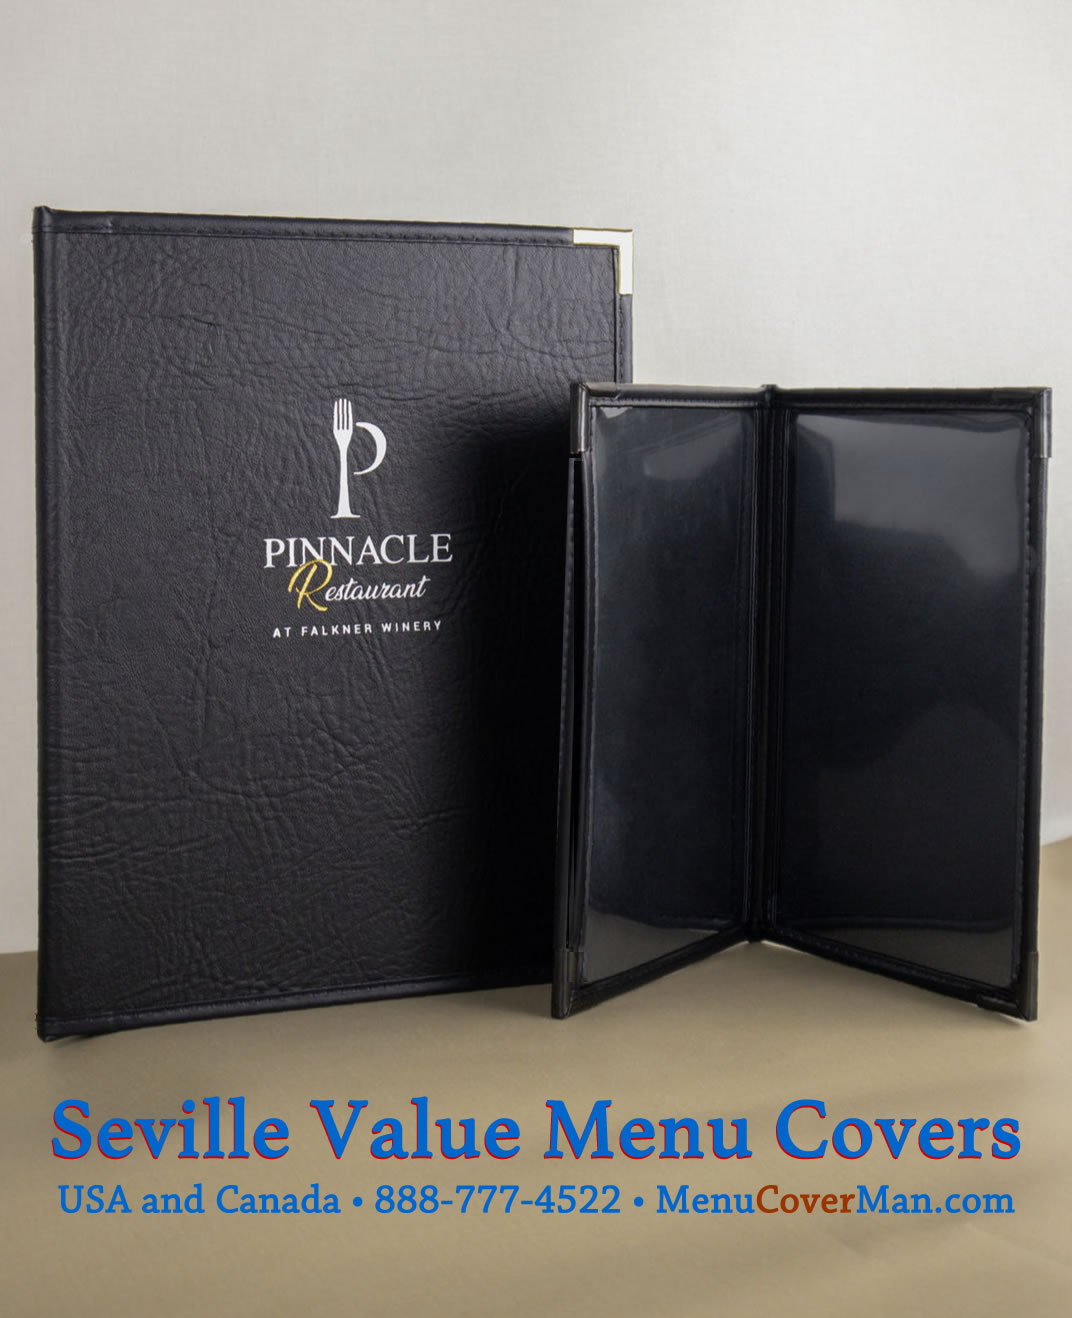 Seville Value Menu Covers ready for your restaurant TODAY!